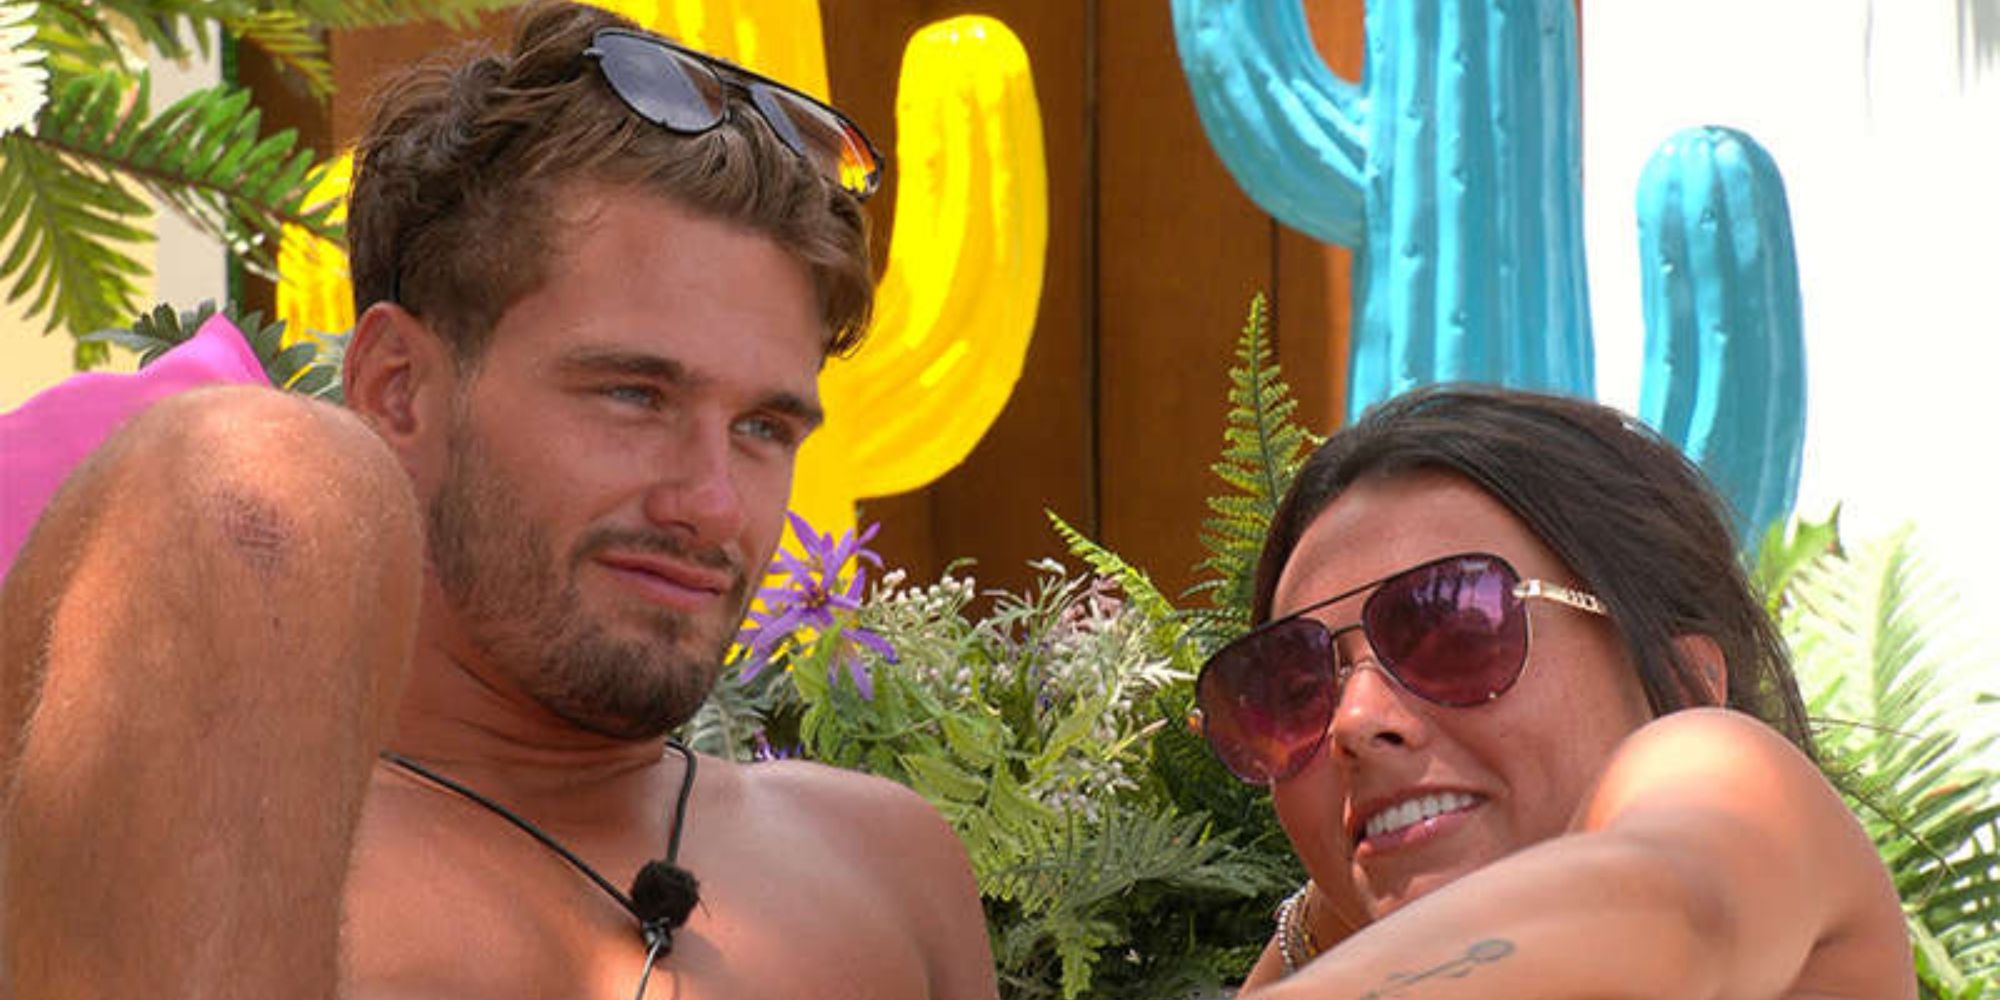 Jacques and Paige relaxing in the sun in Love Island UK season 8